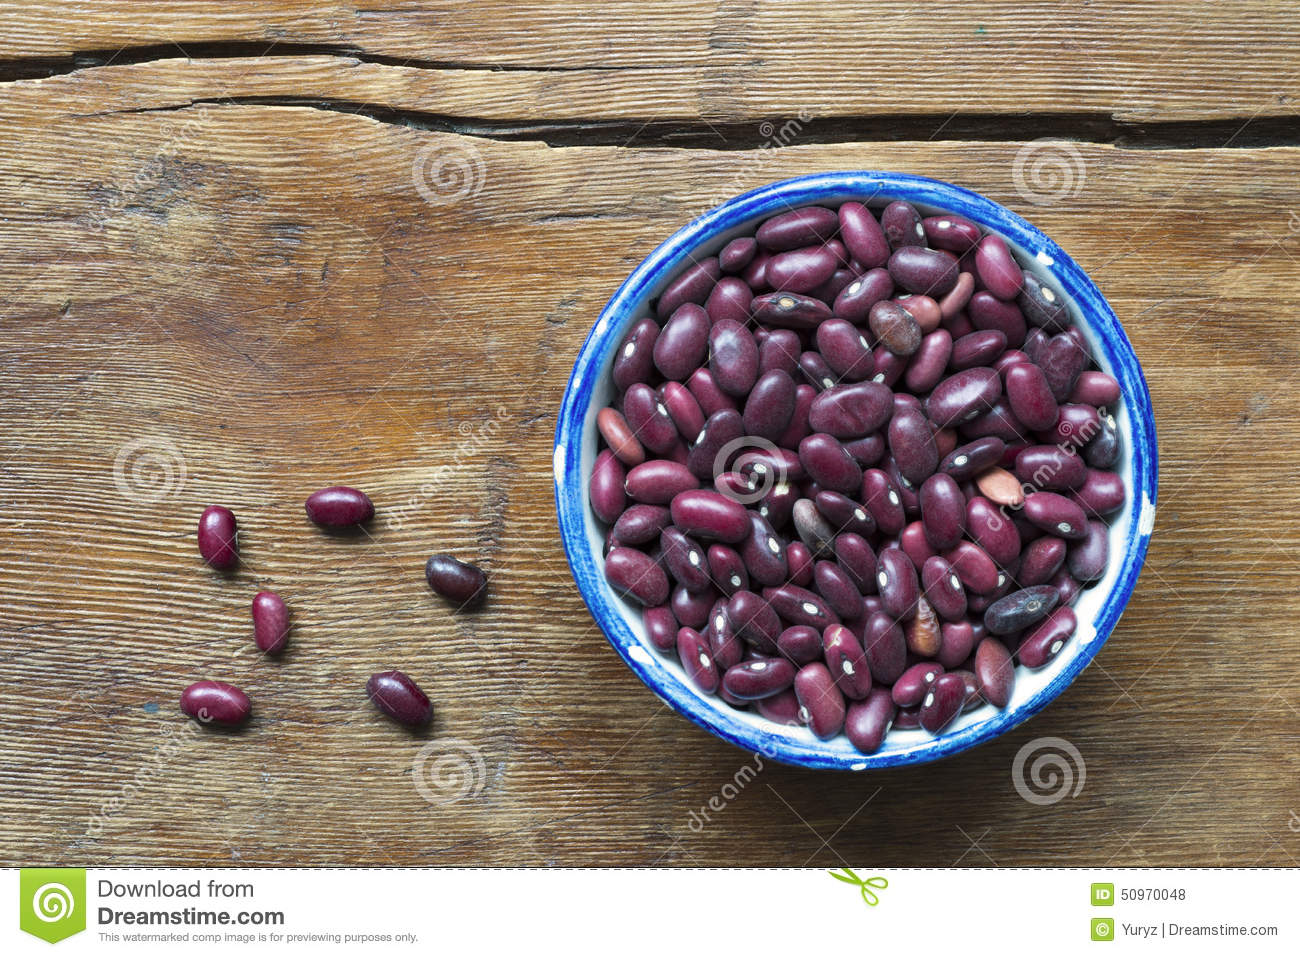 Many Red Kidney Beans In Small Blue Cup On Vintage Wooden Table